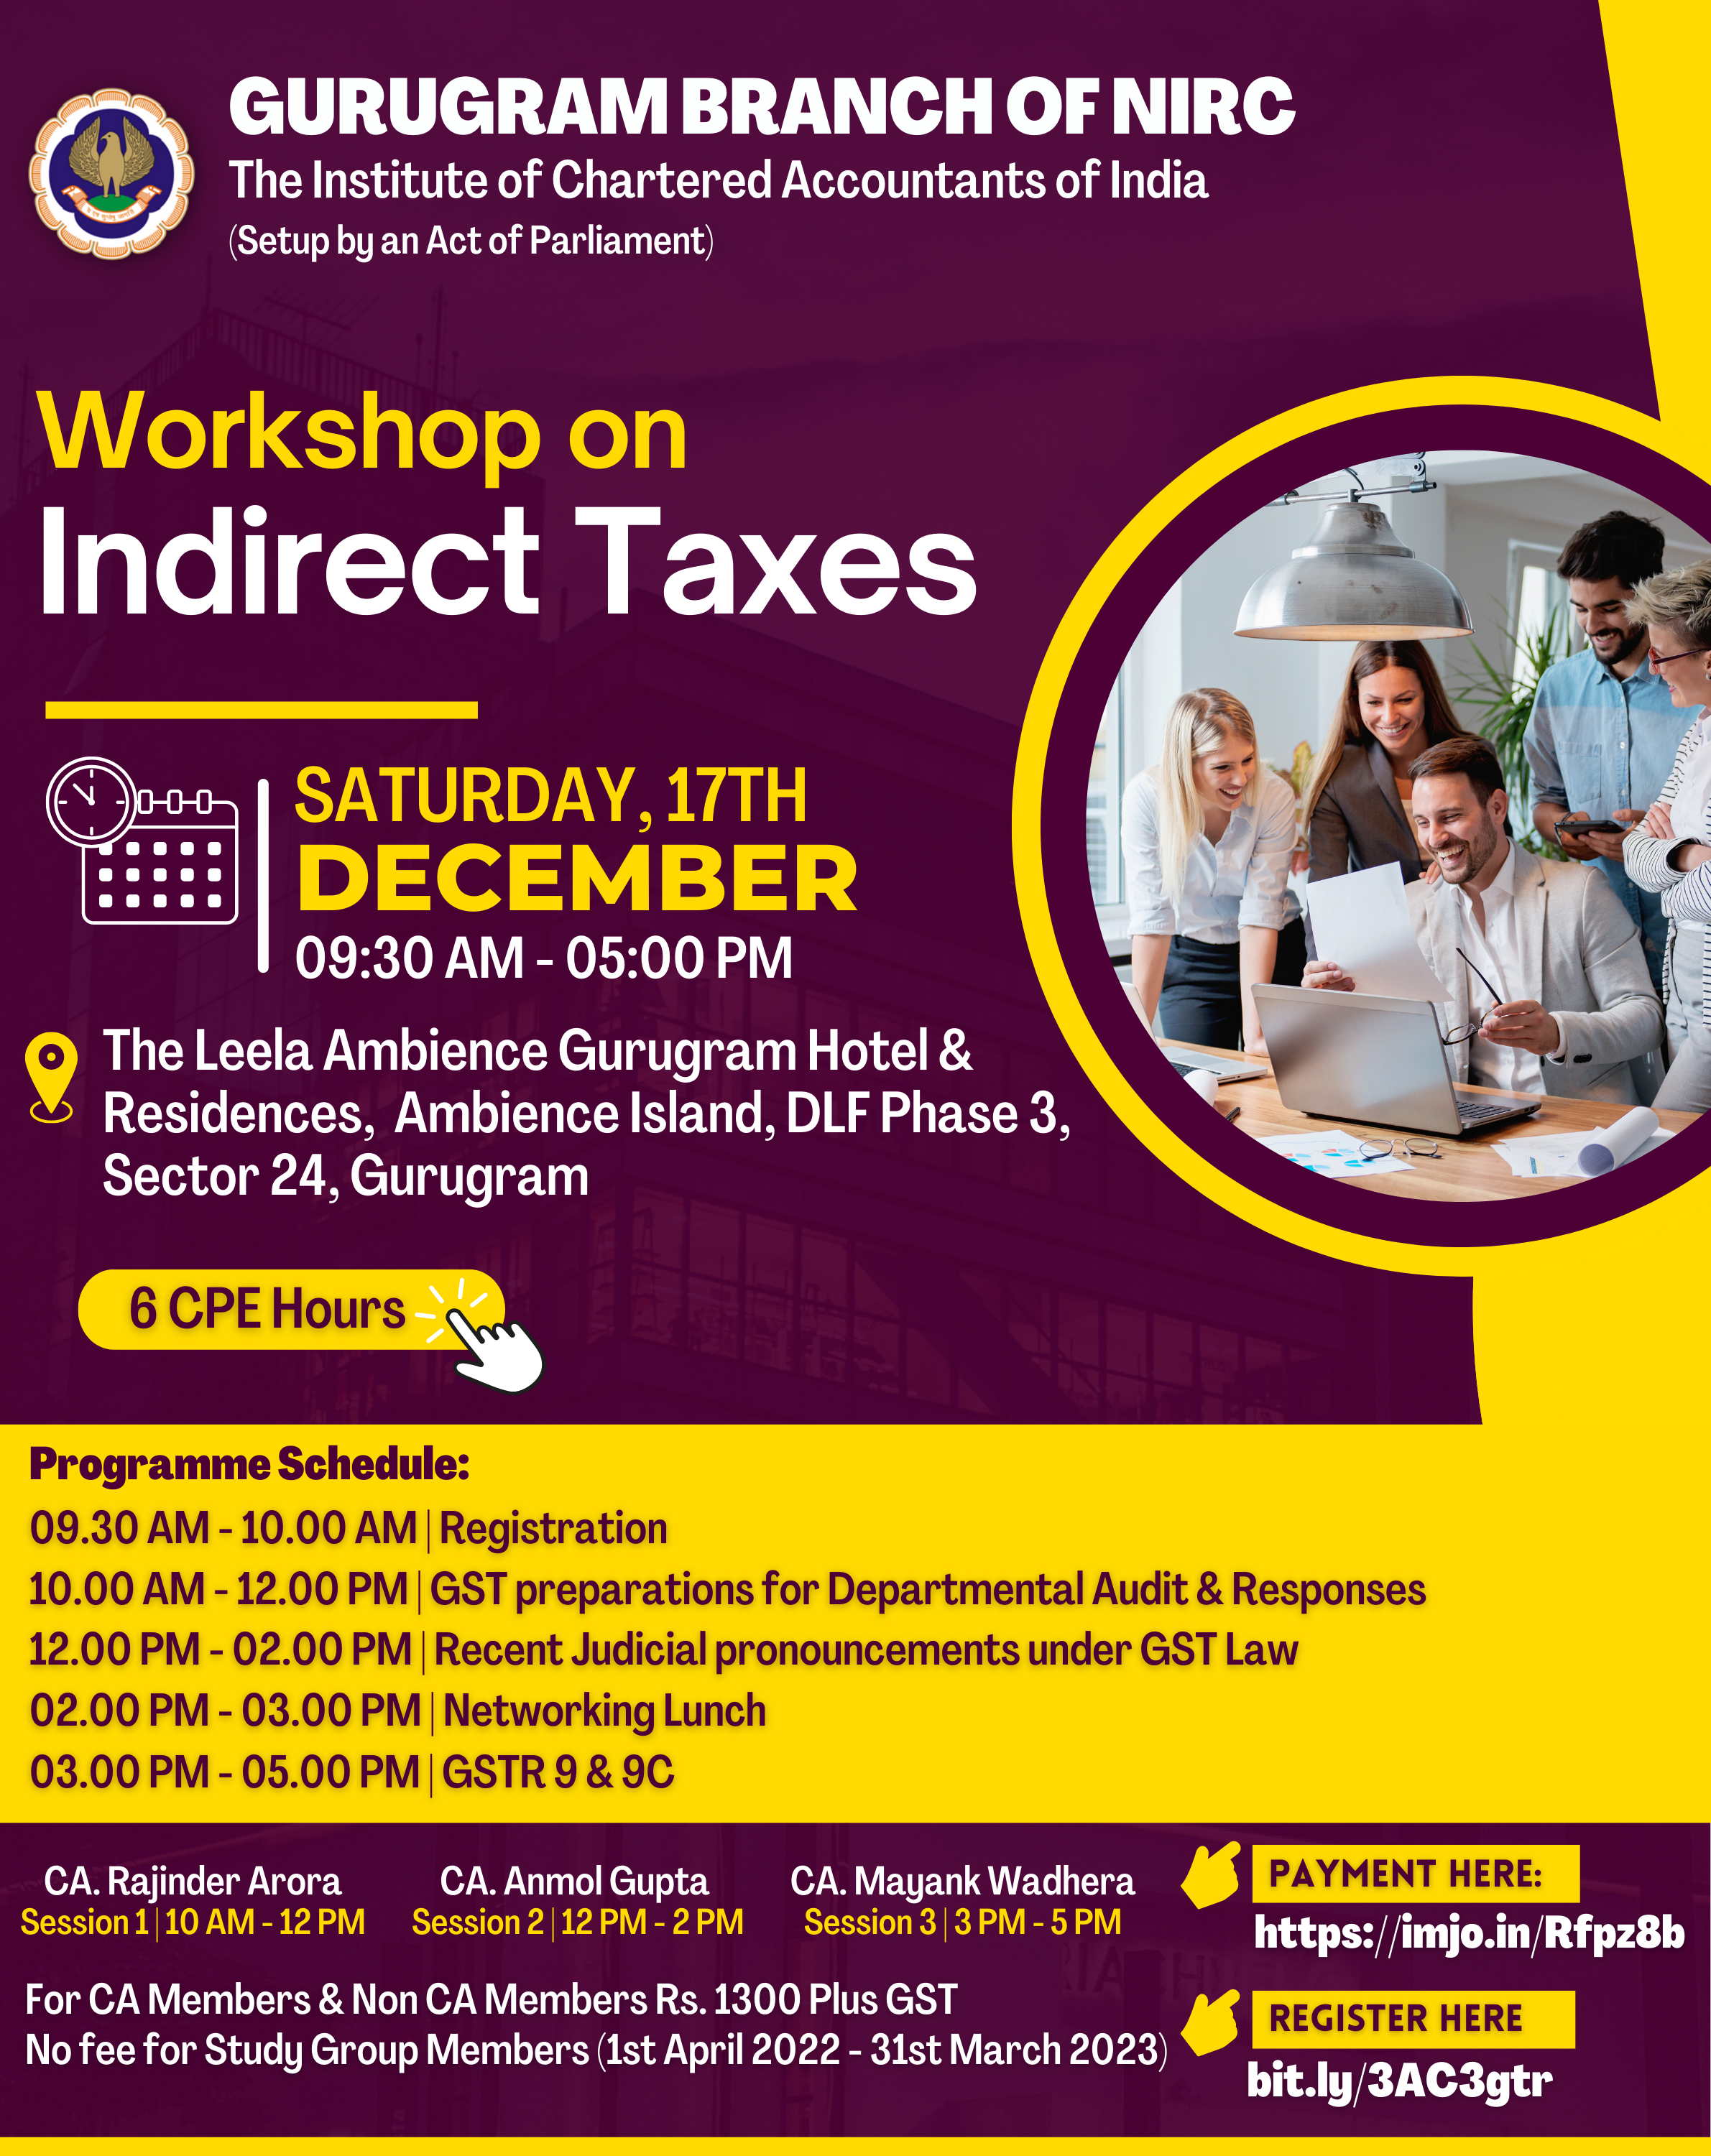 Physical Workshop on Indirect Taxes